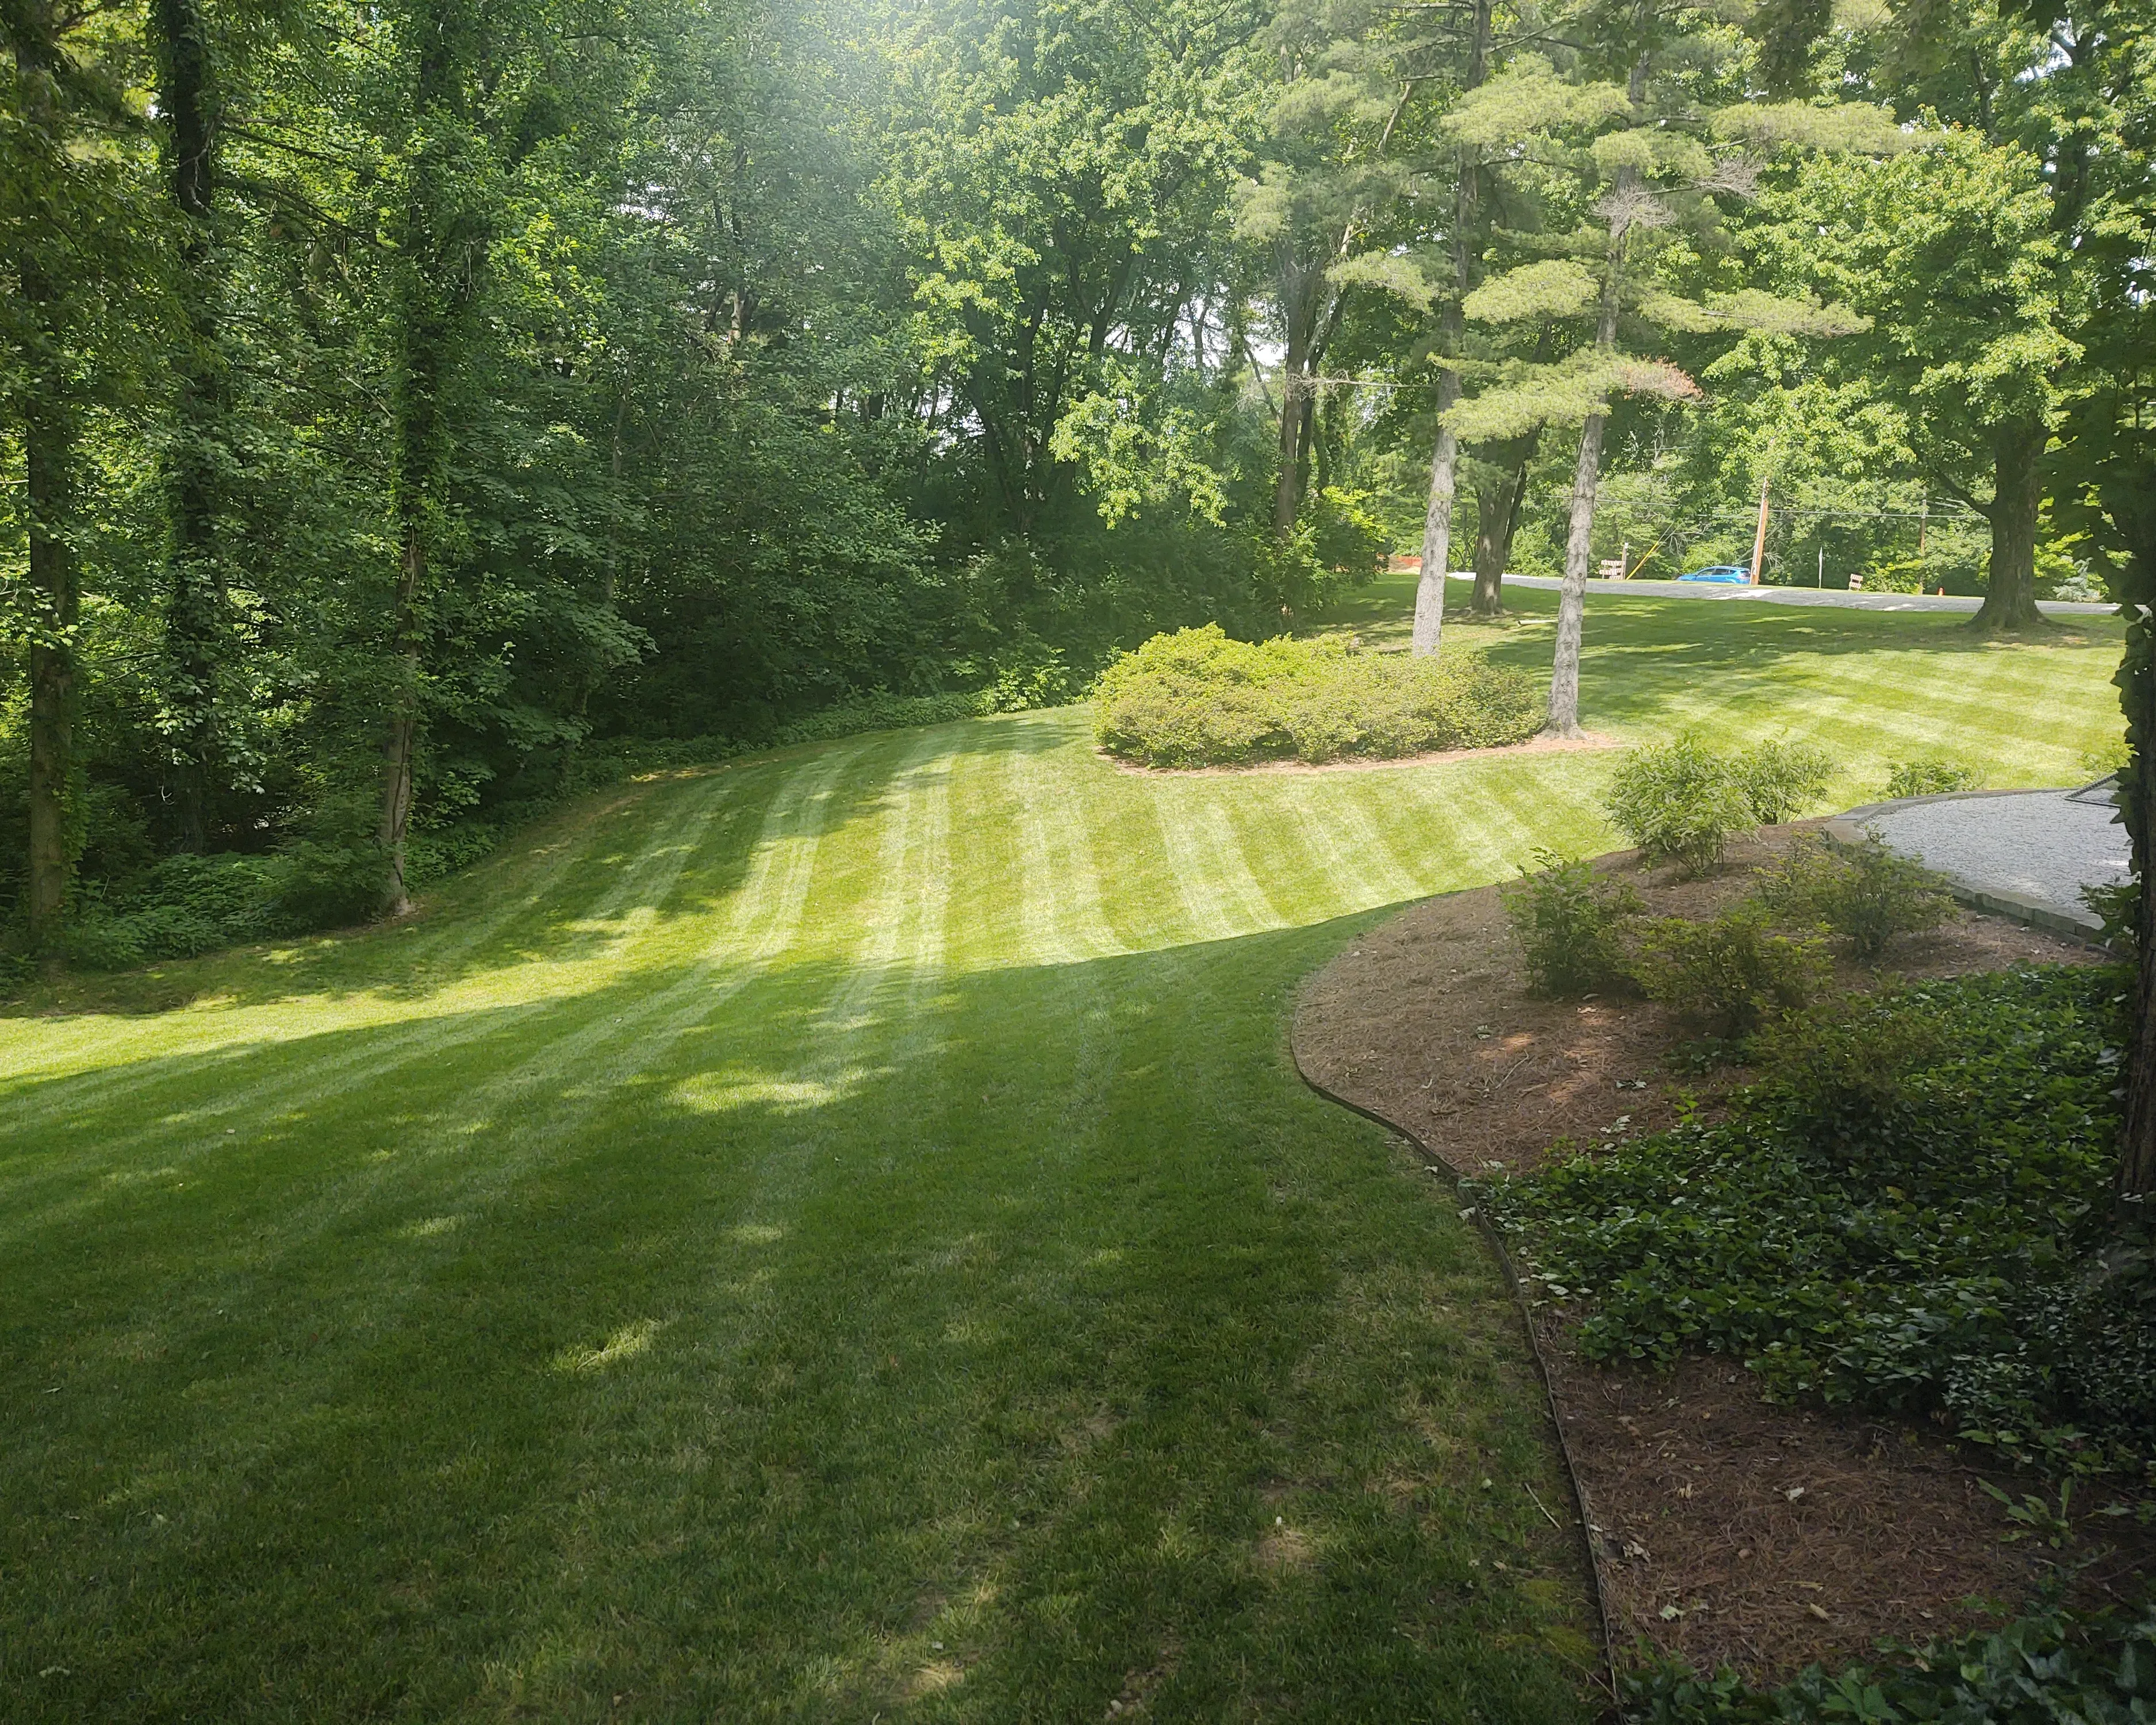 Lawn Care Maintenance for The Grass Guys Complete Lawn Care LLC. in Evansville, IN